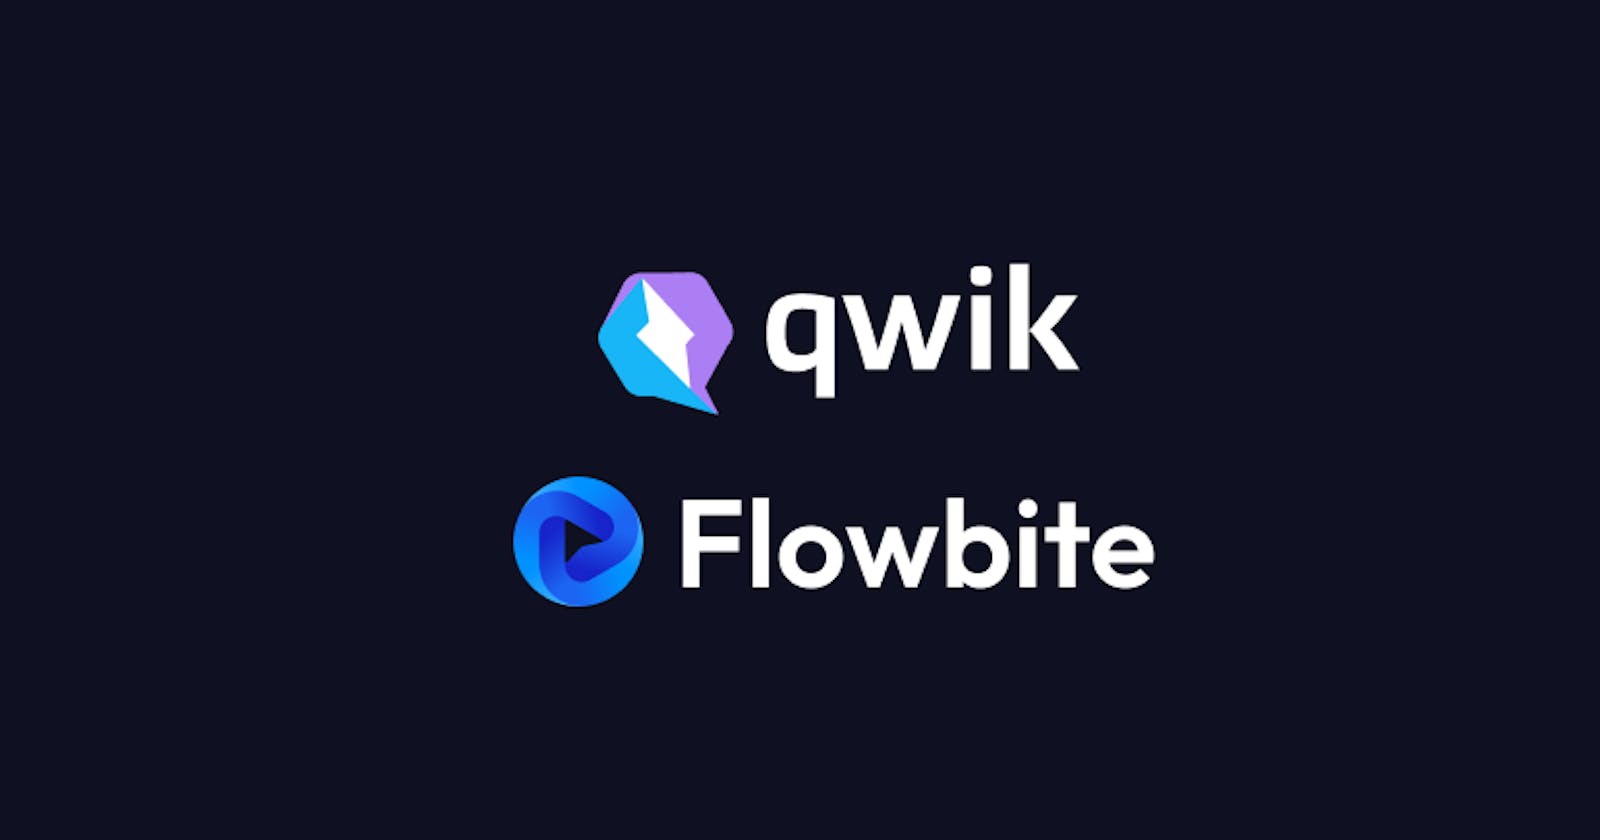 How to set up Tailwind CSS and Flowbite with a new Qwik project